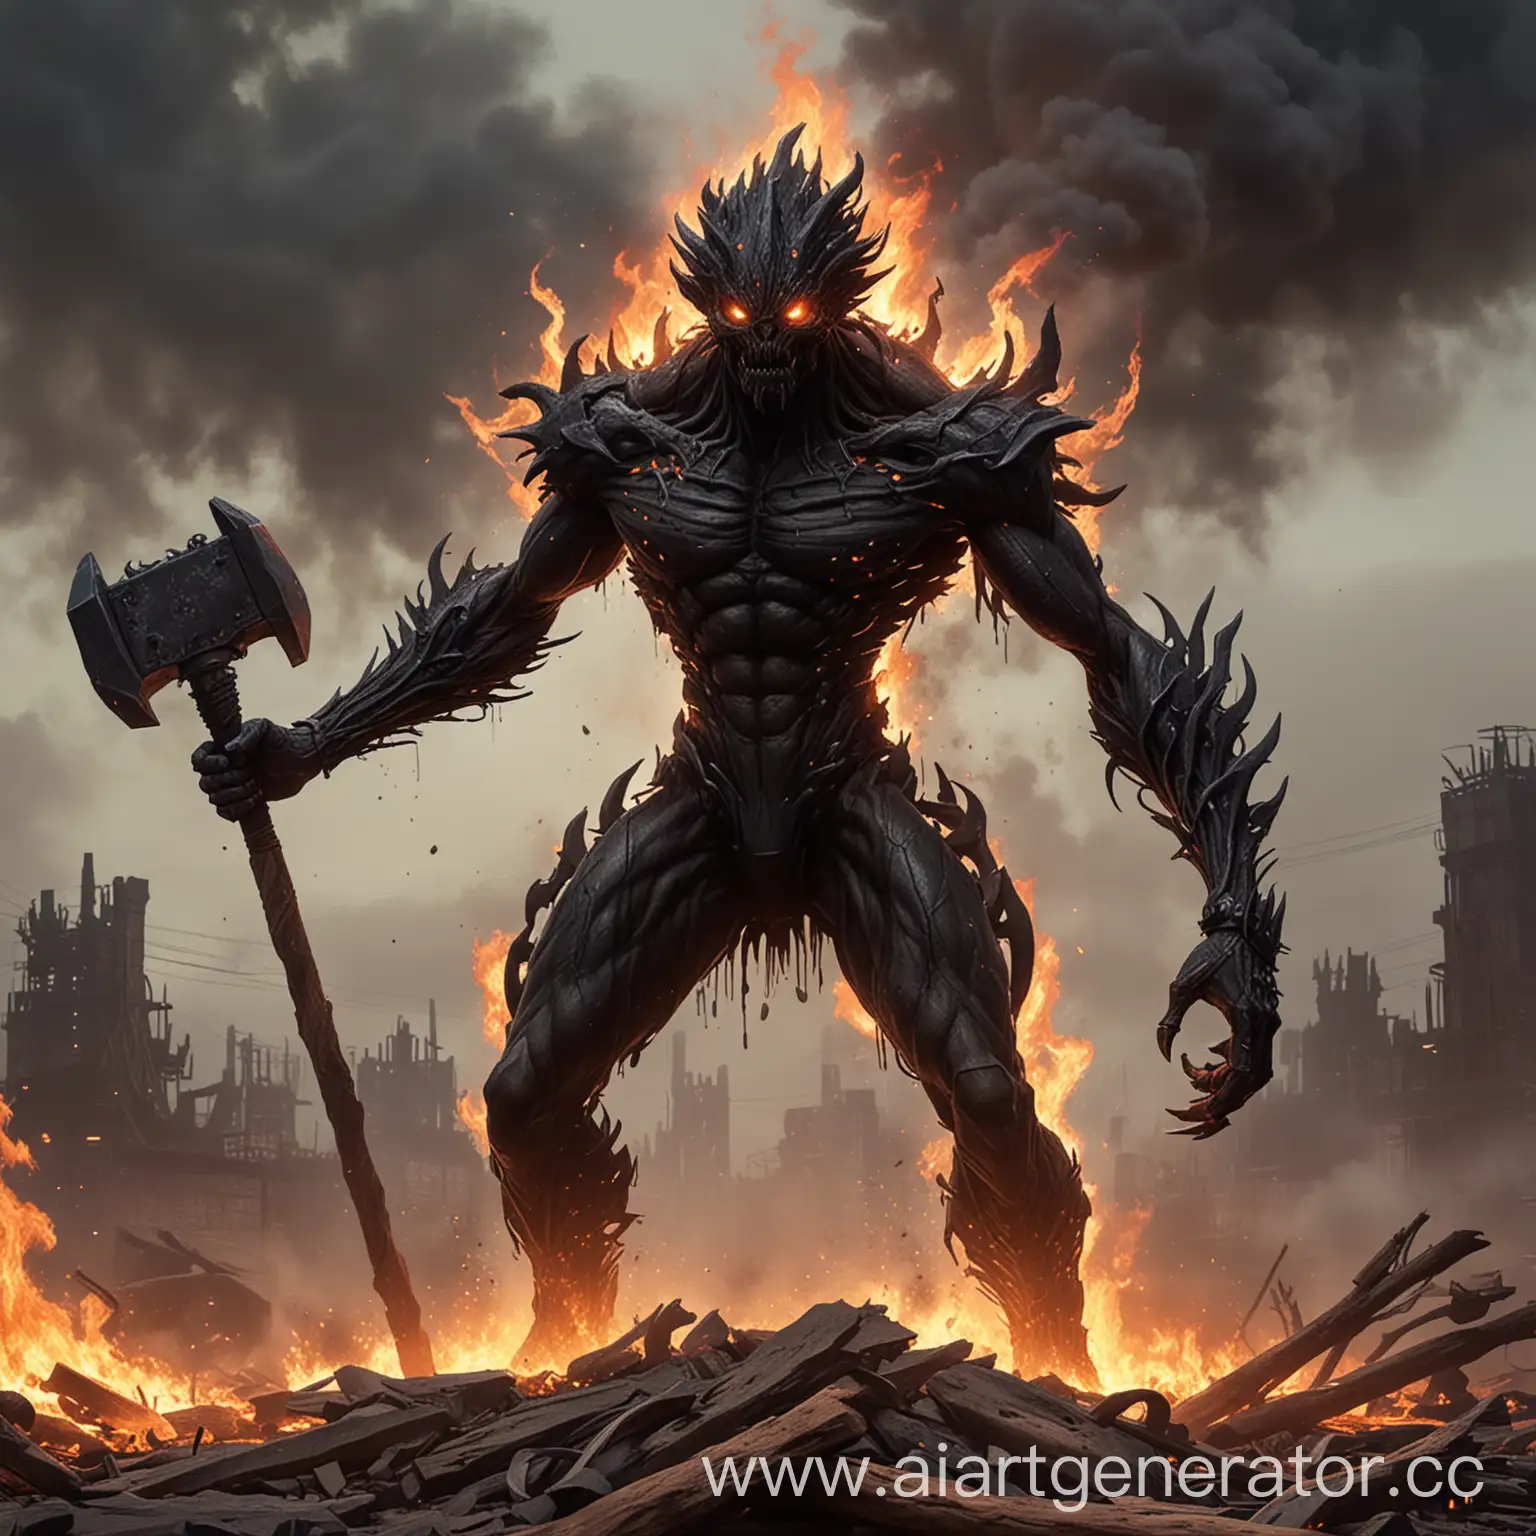 Draw me a black humanoid monster with long limbs, 6 arms and a huge burning hammer in his hands, he stands hunched over and looks at the camera